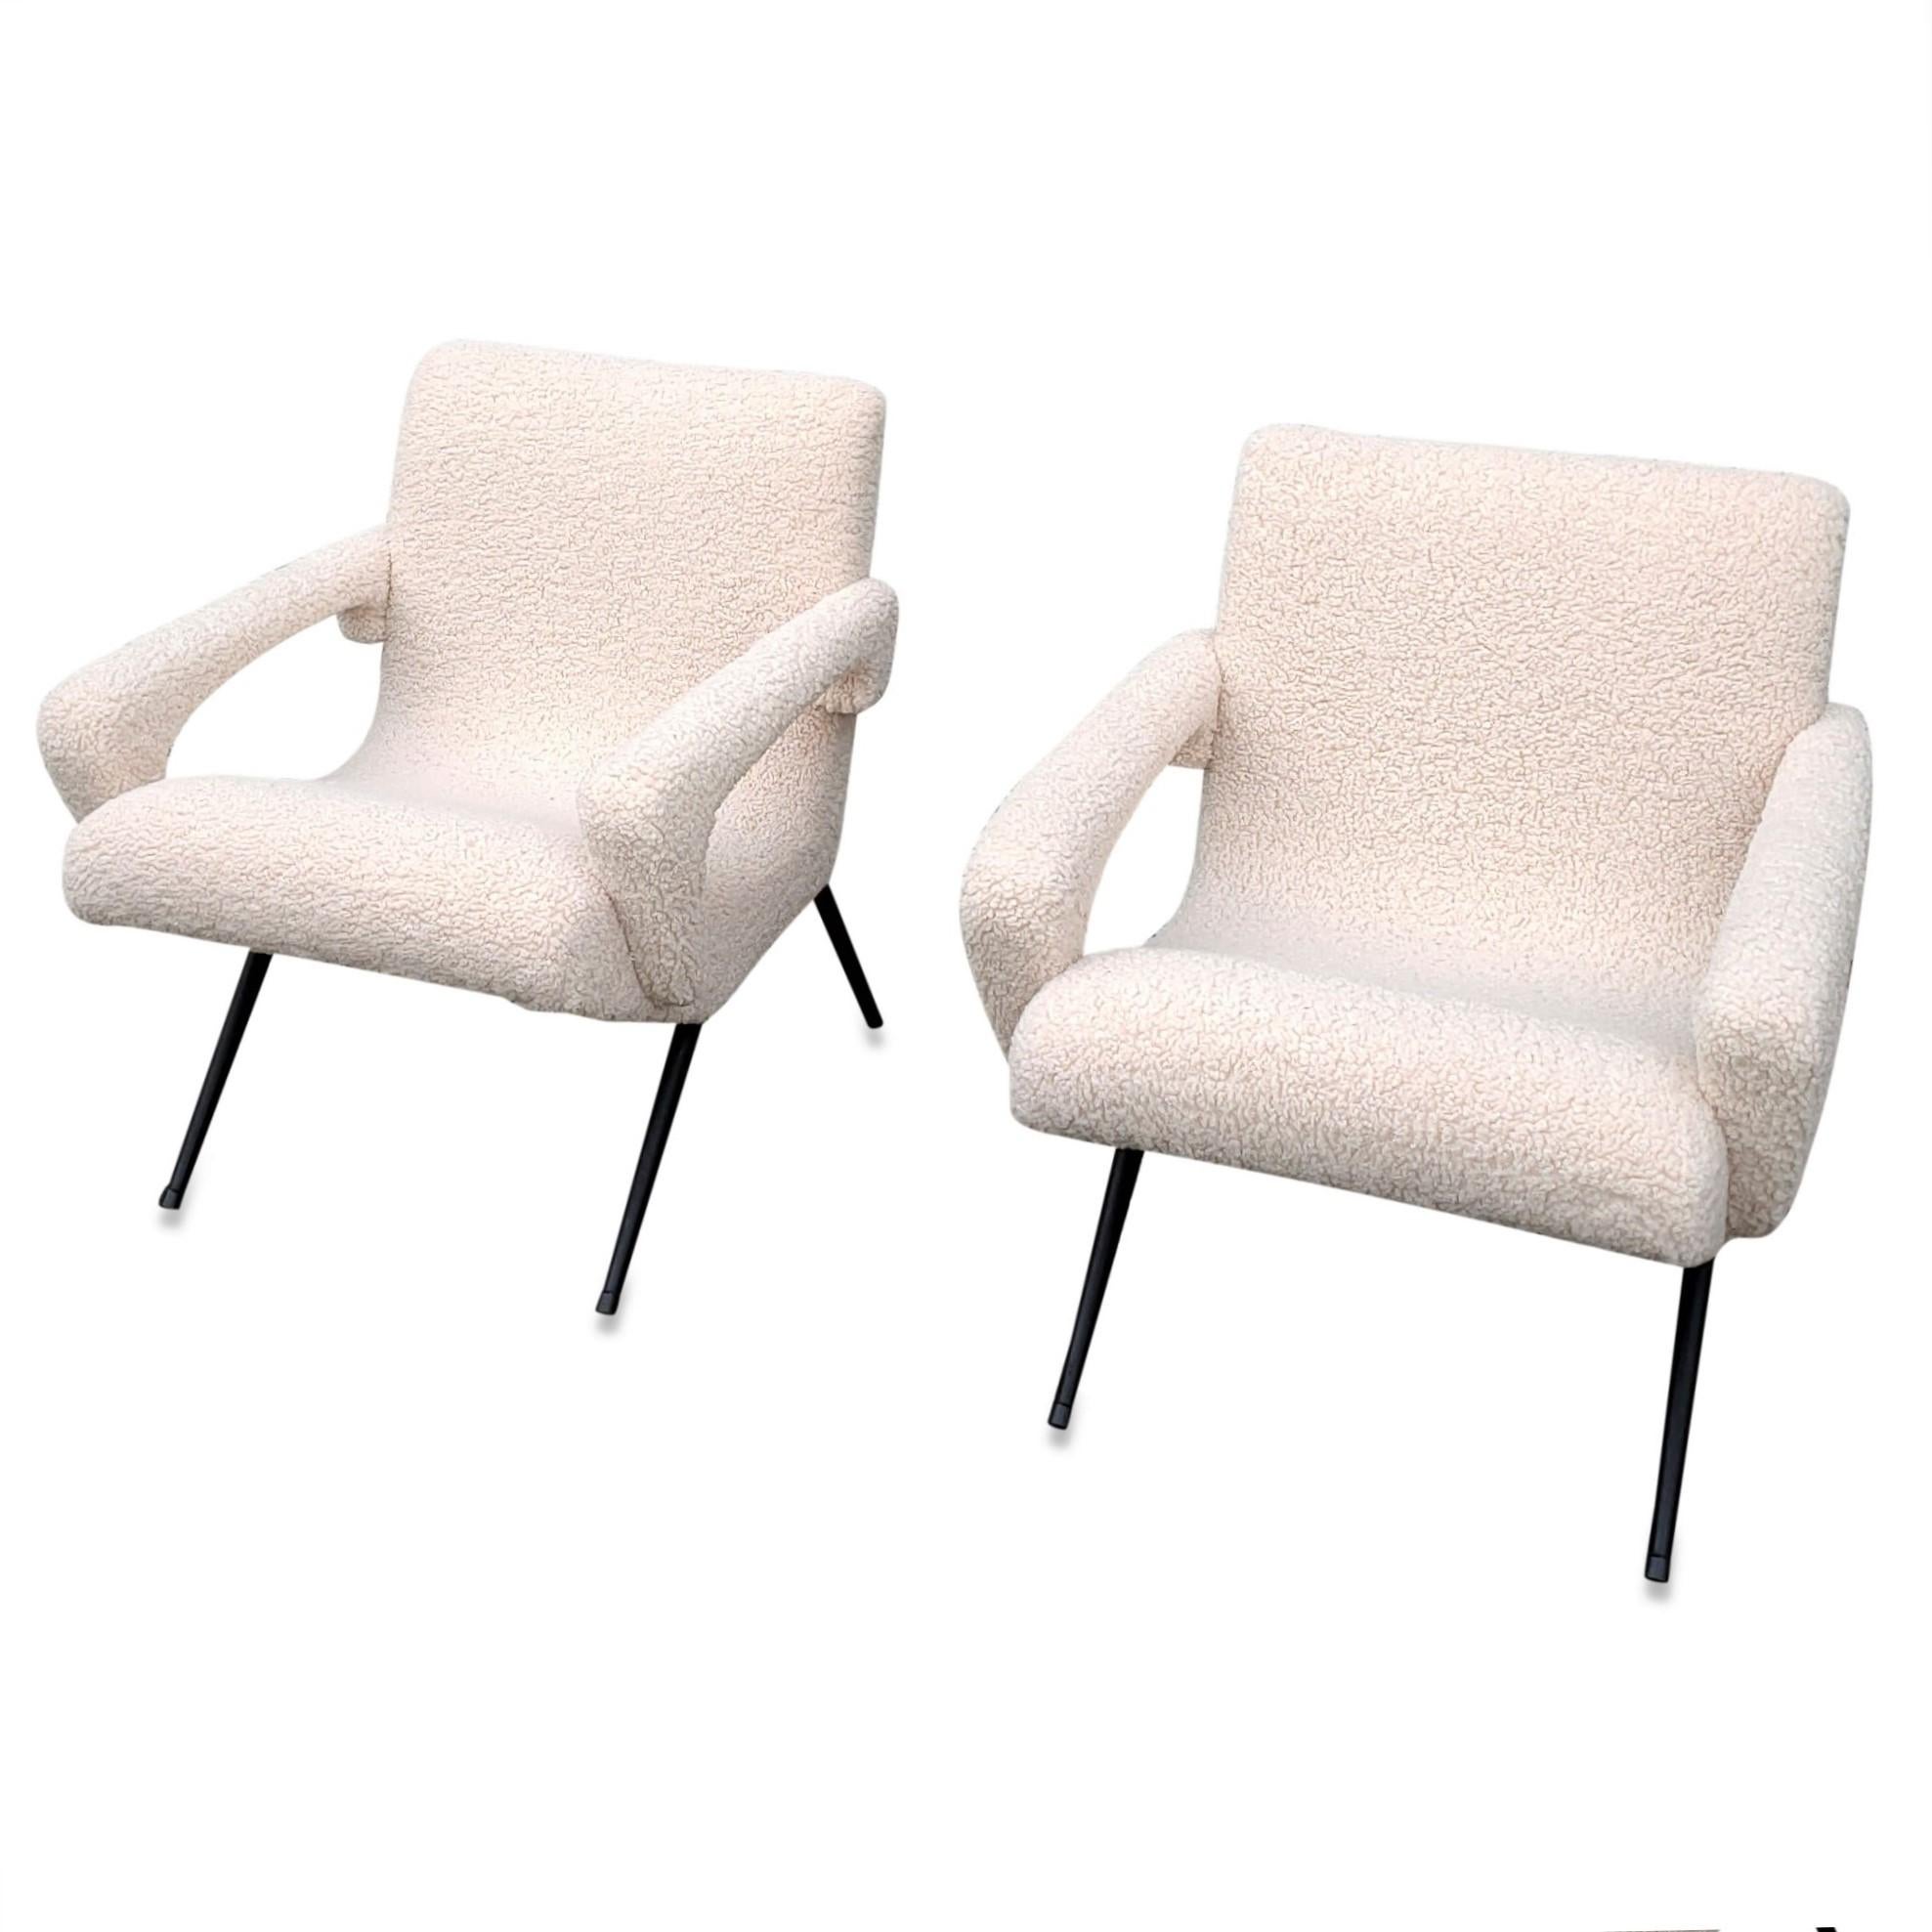 Lacquered Pair of Mid-Century Modern Compact Armchairs in White Bouclette, France, 1950s